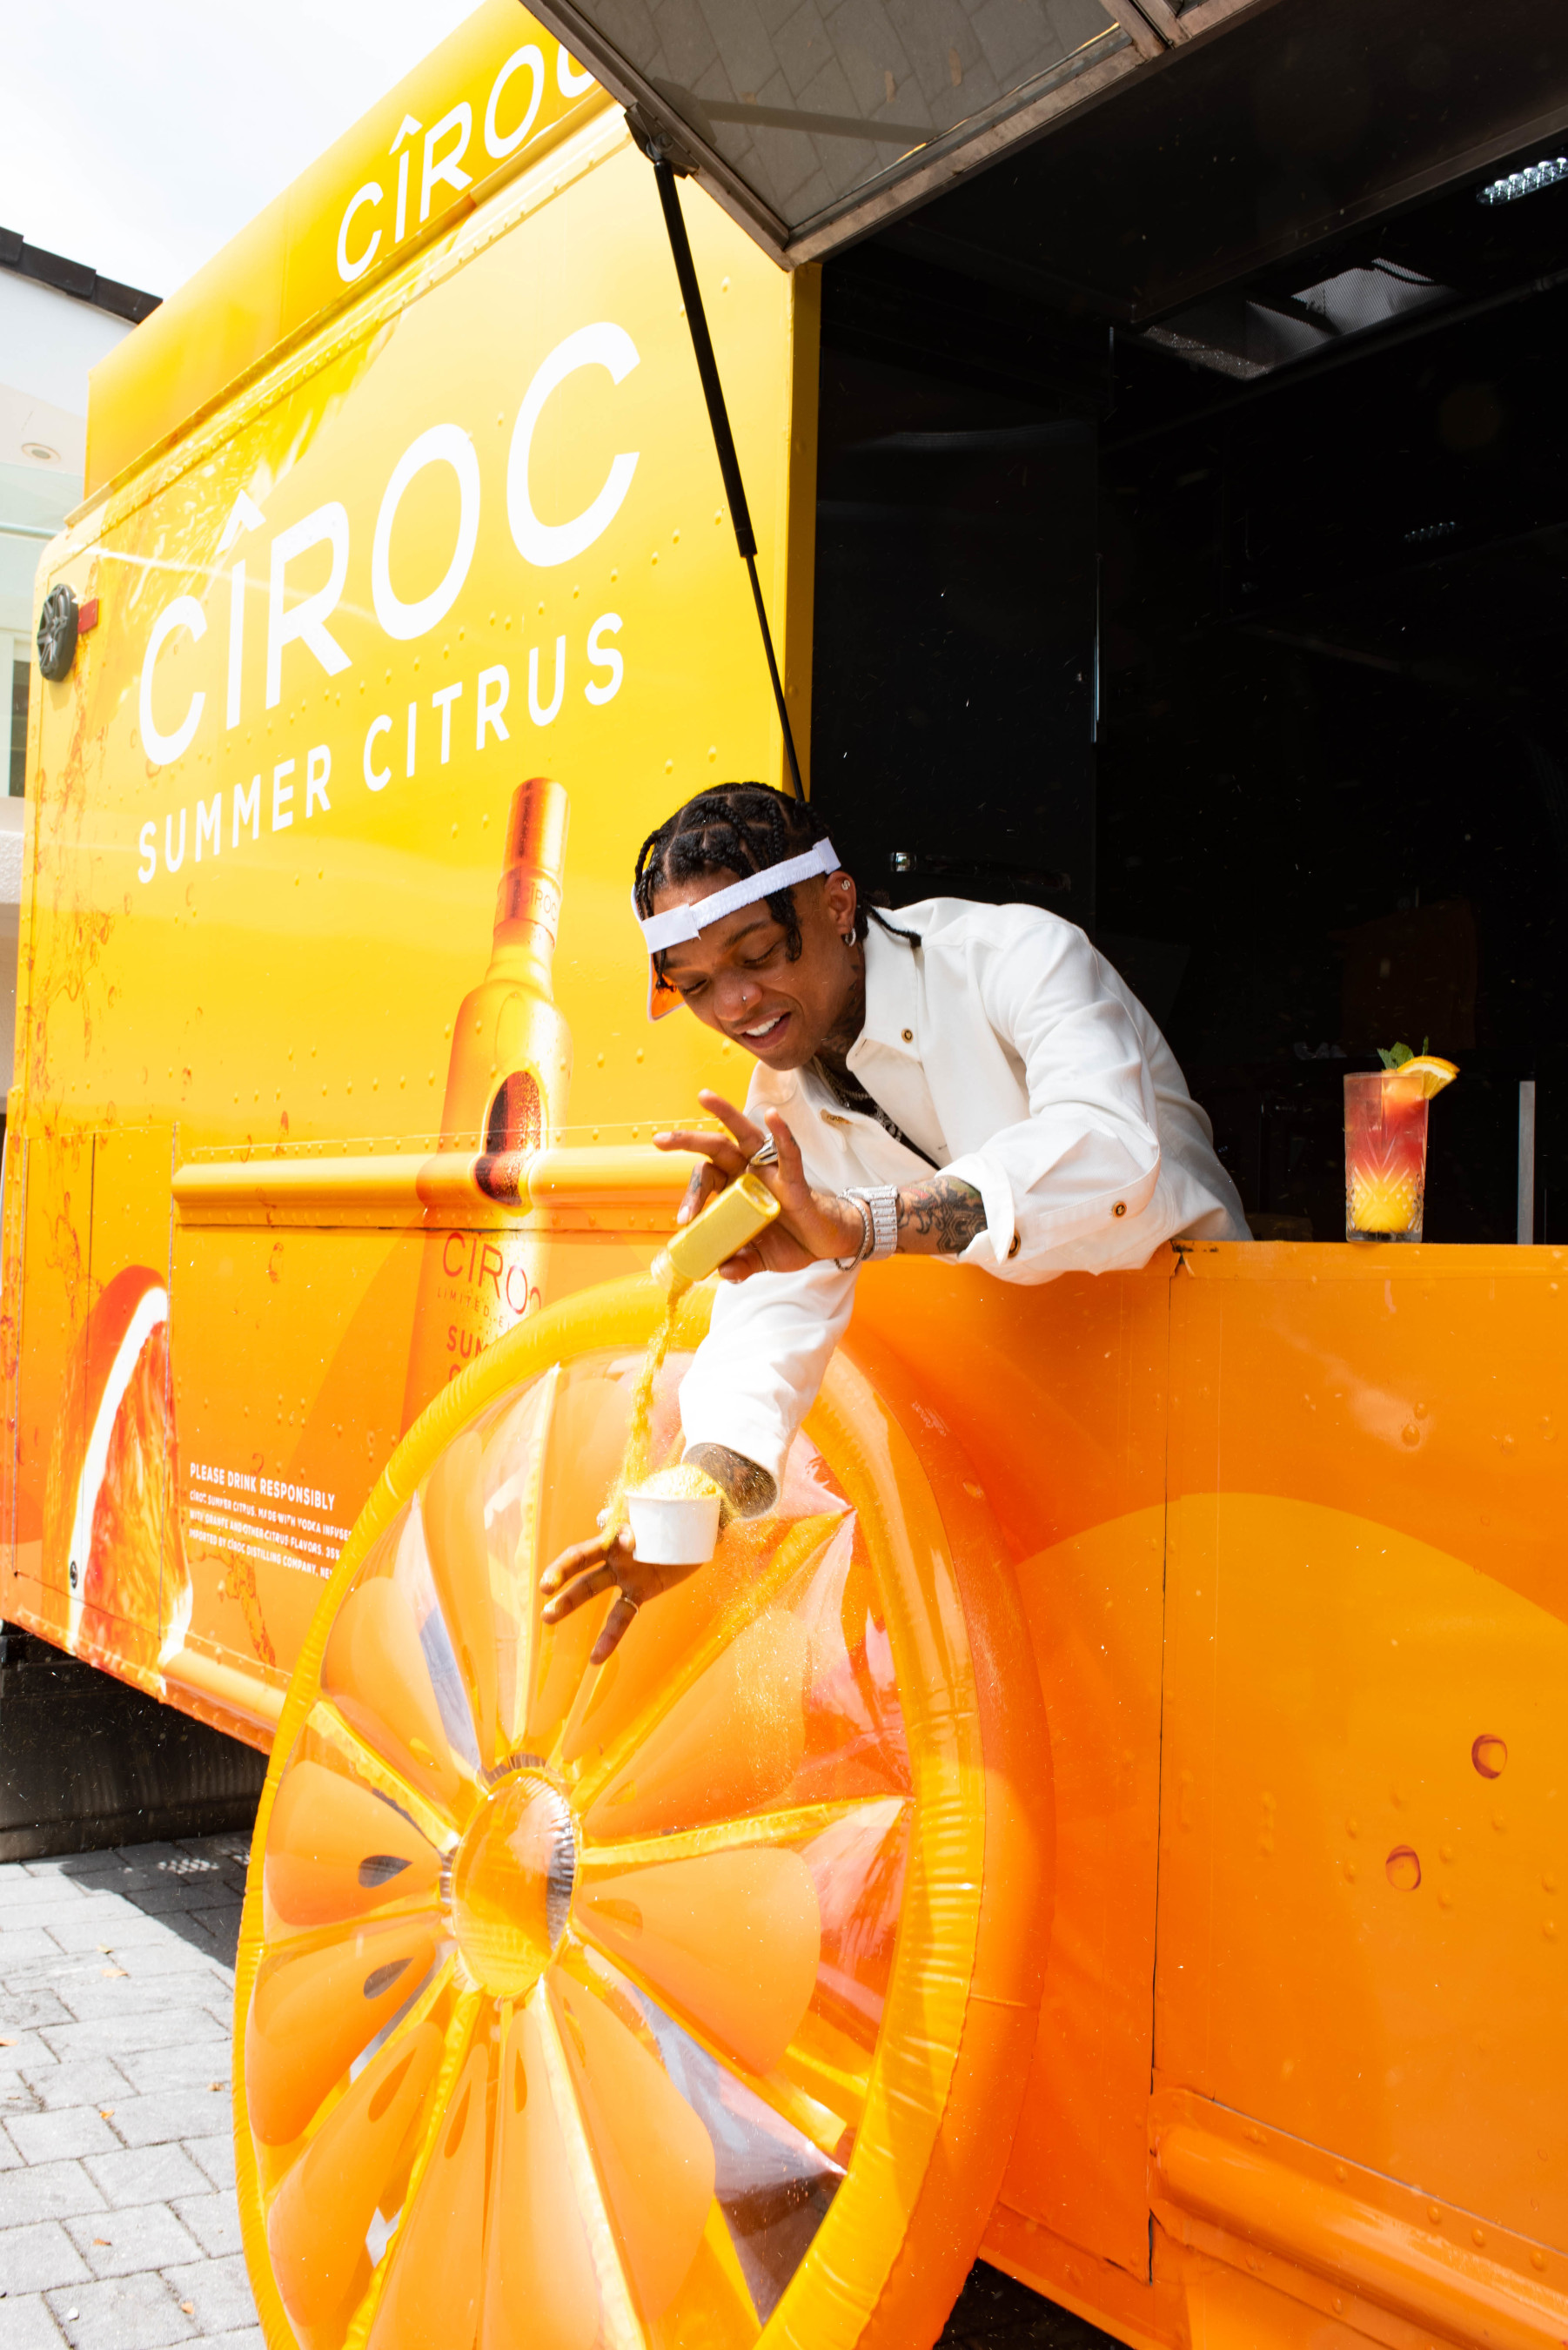 Inspired by the Flavors of CÎROC Summer Citrus, New ‘Citrus Drip’ with Swae Sprinkles